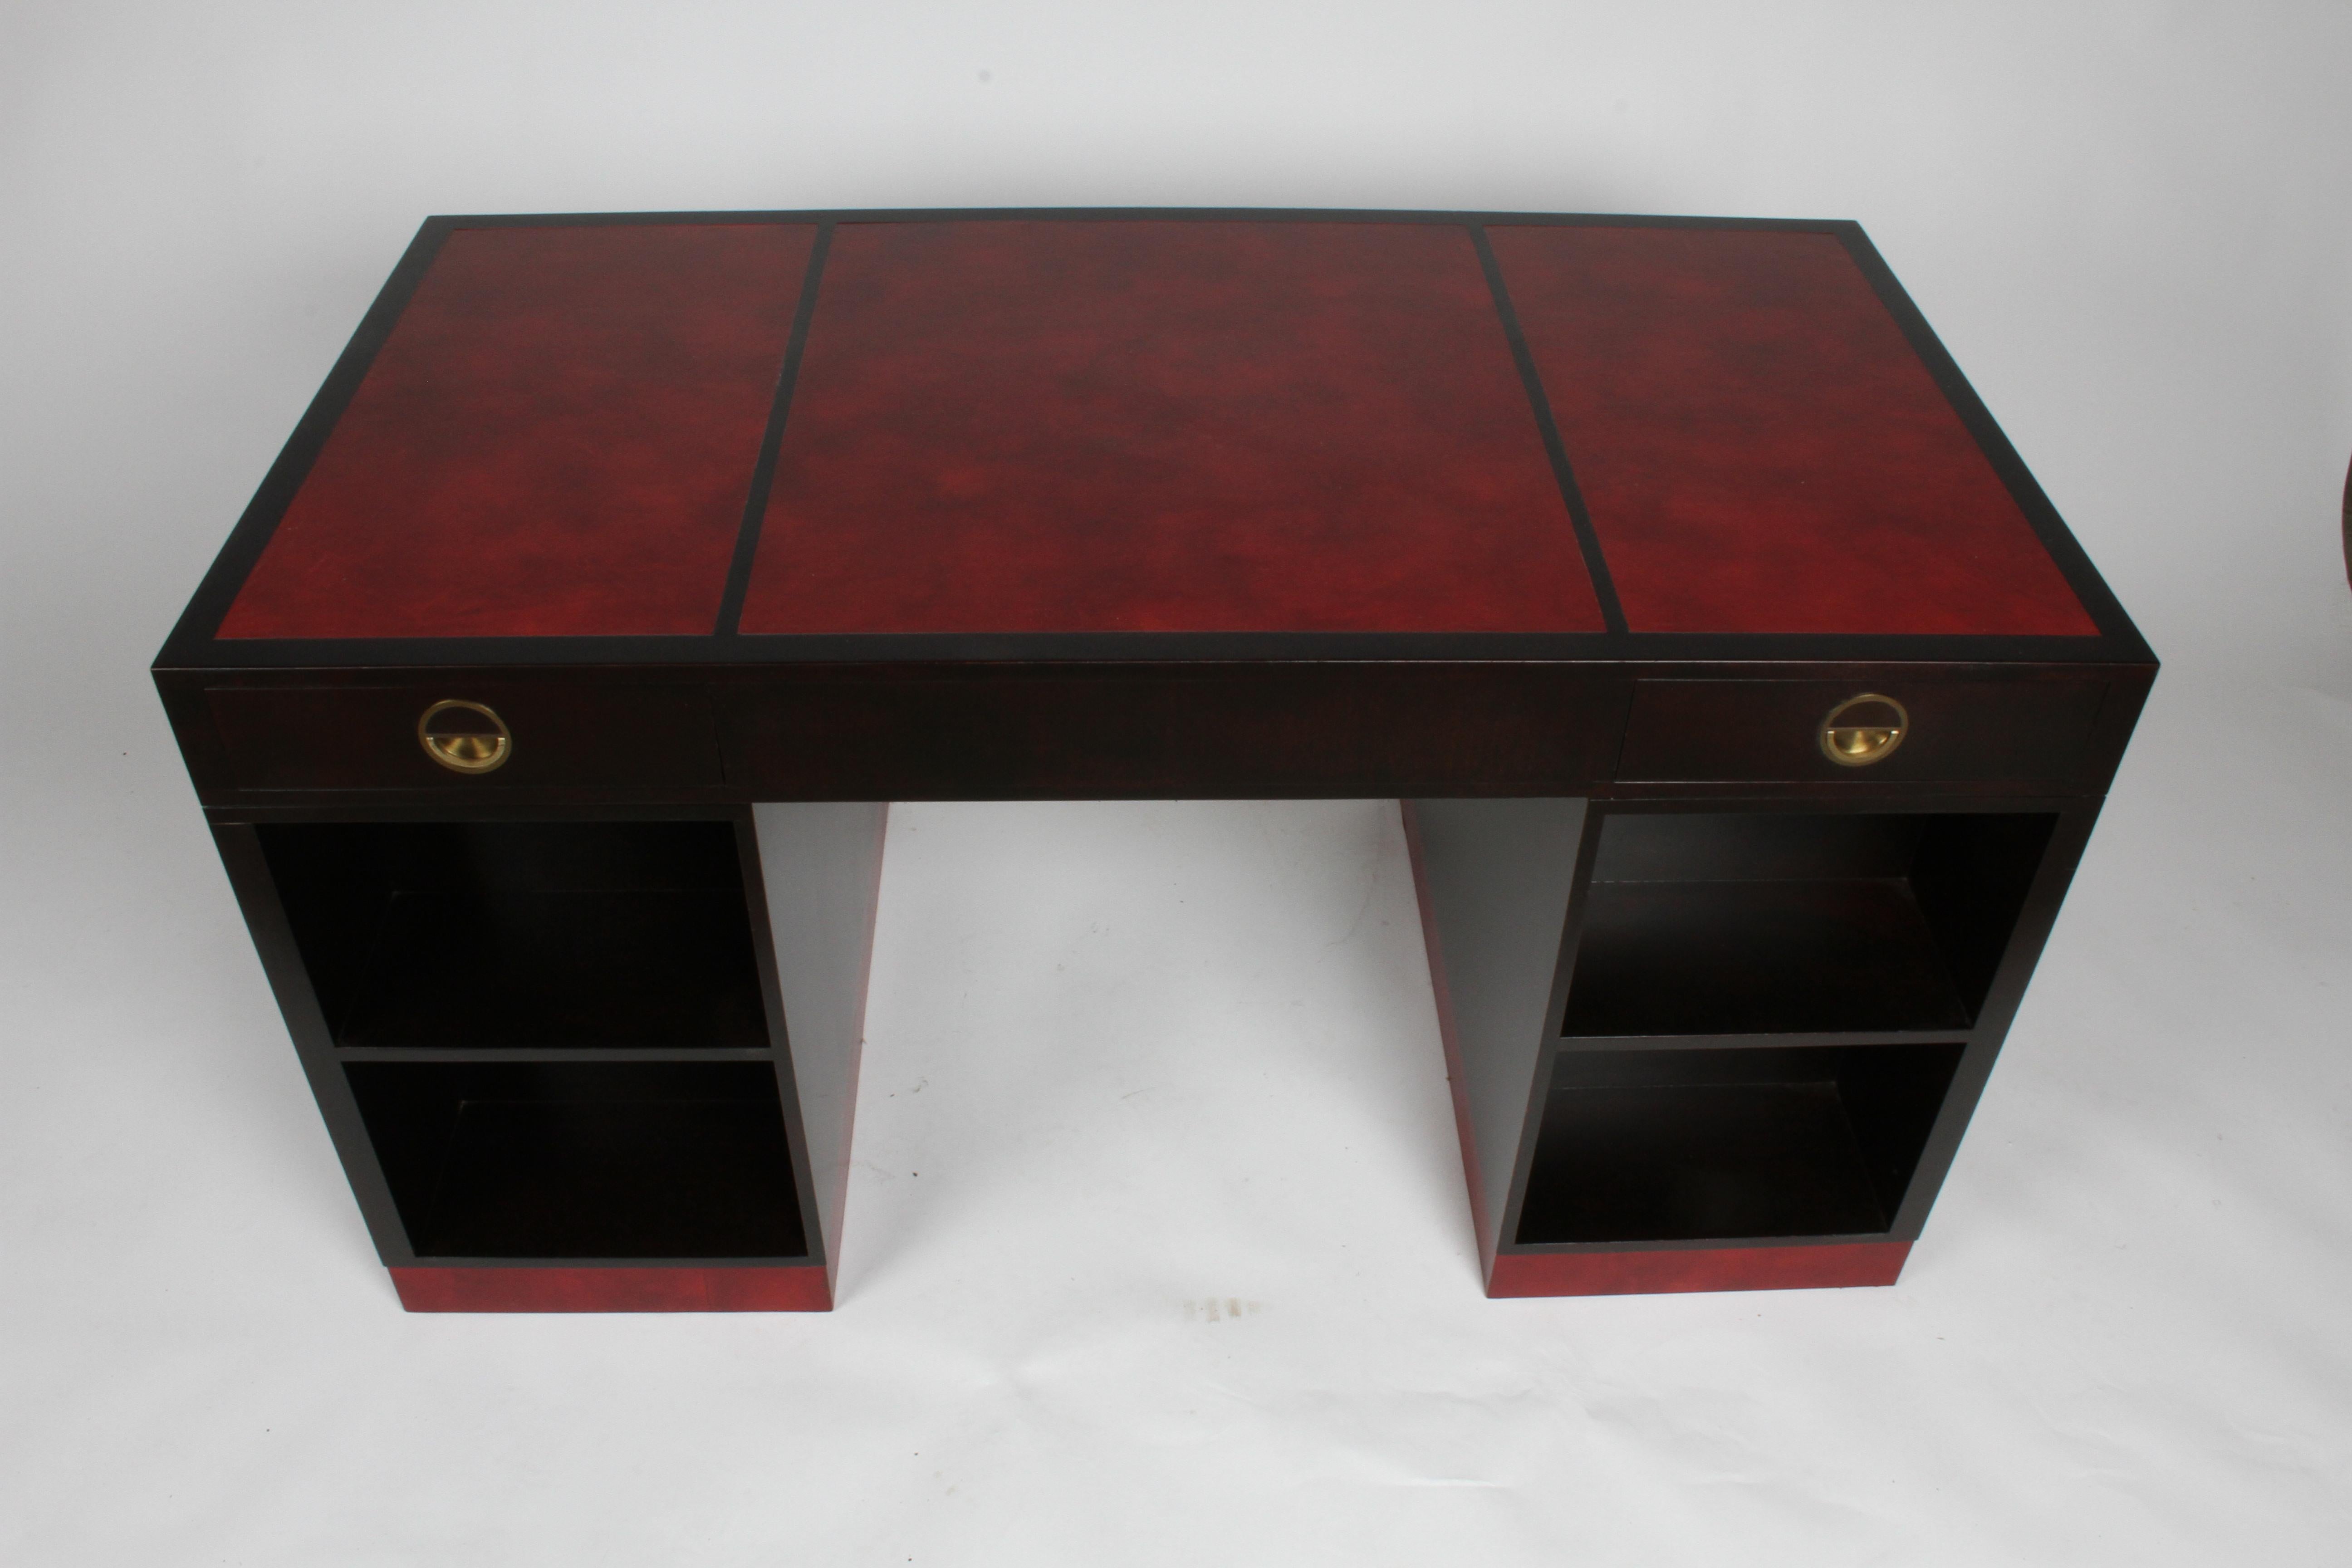 Uncommon Edward Wormley for Dunbar, partners or library desk from an Arthur Elrod designed interior. Rear of desk flanked with bookcases on both sides of pedestals and two drawers with pullout writing surfaces. Main side contains center drawer, with